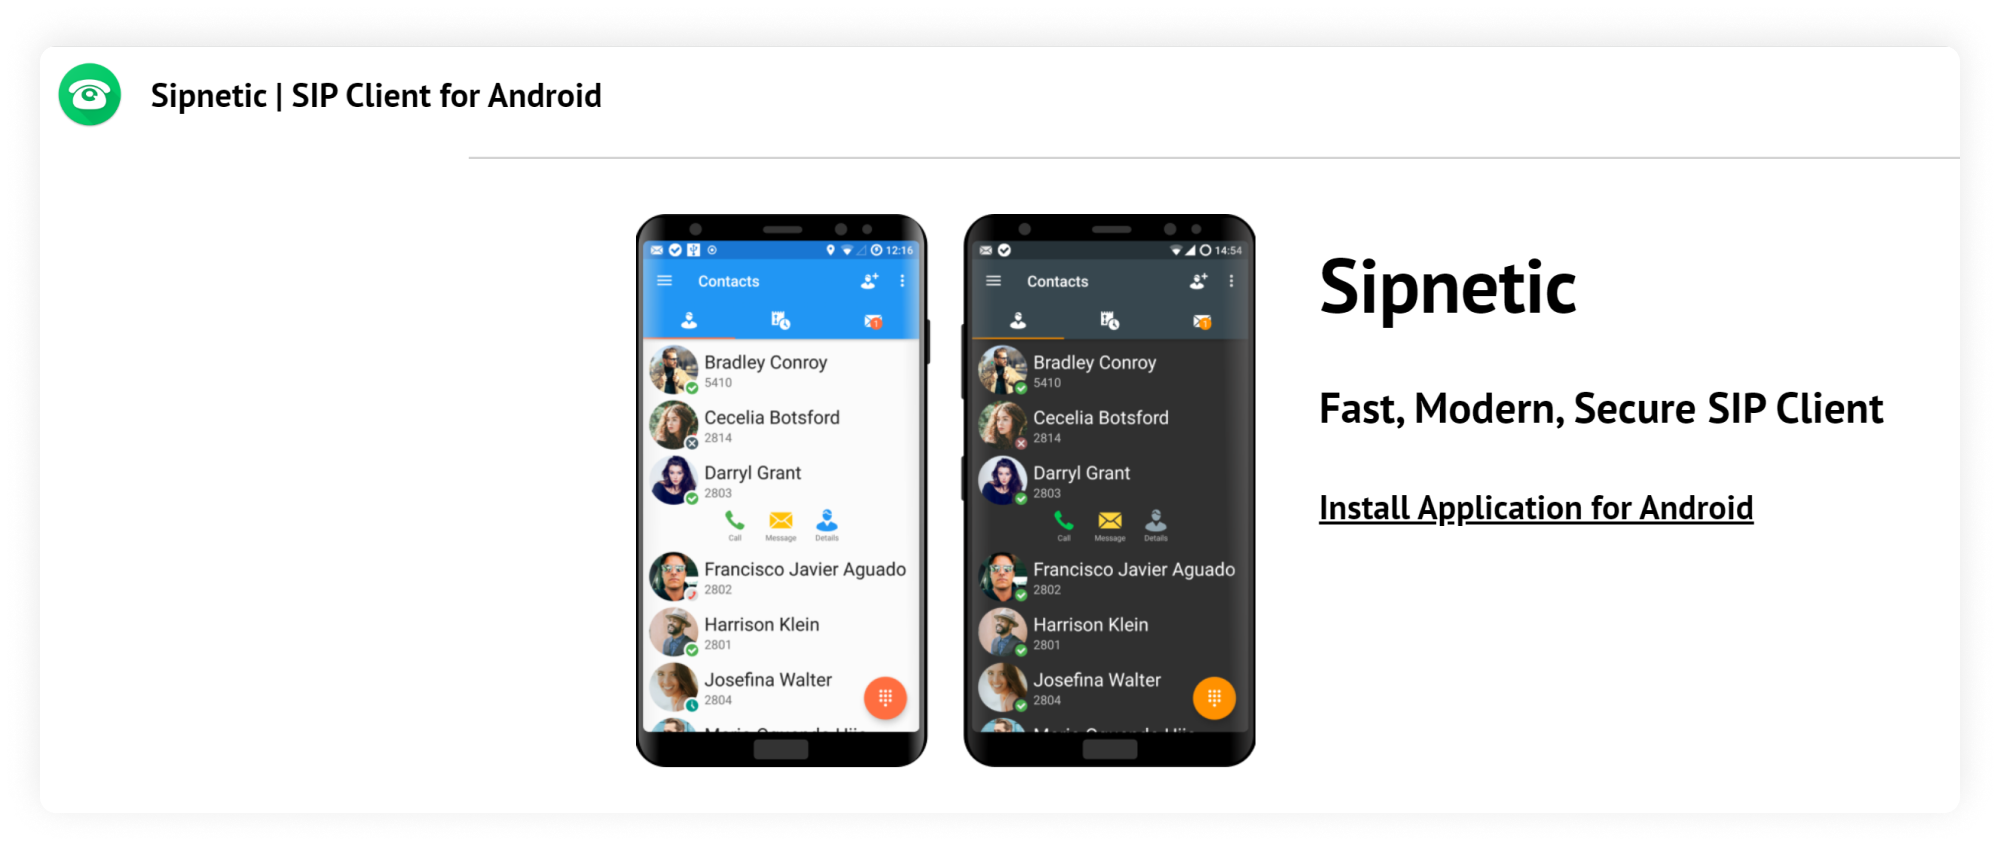 Free SIP Phone for Windows. Ideal for Small Business